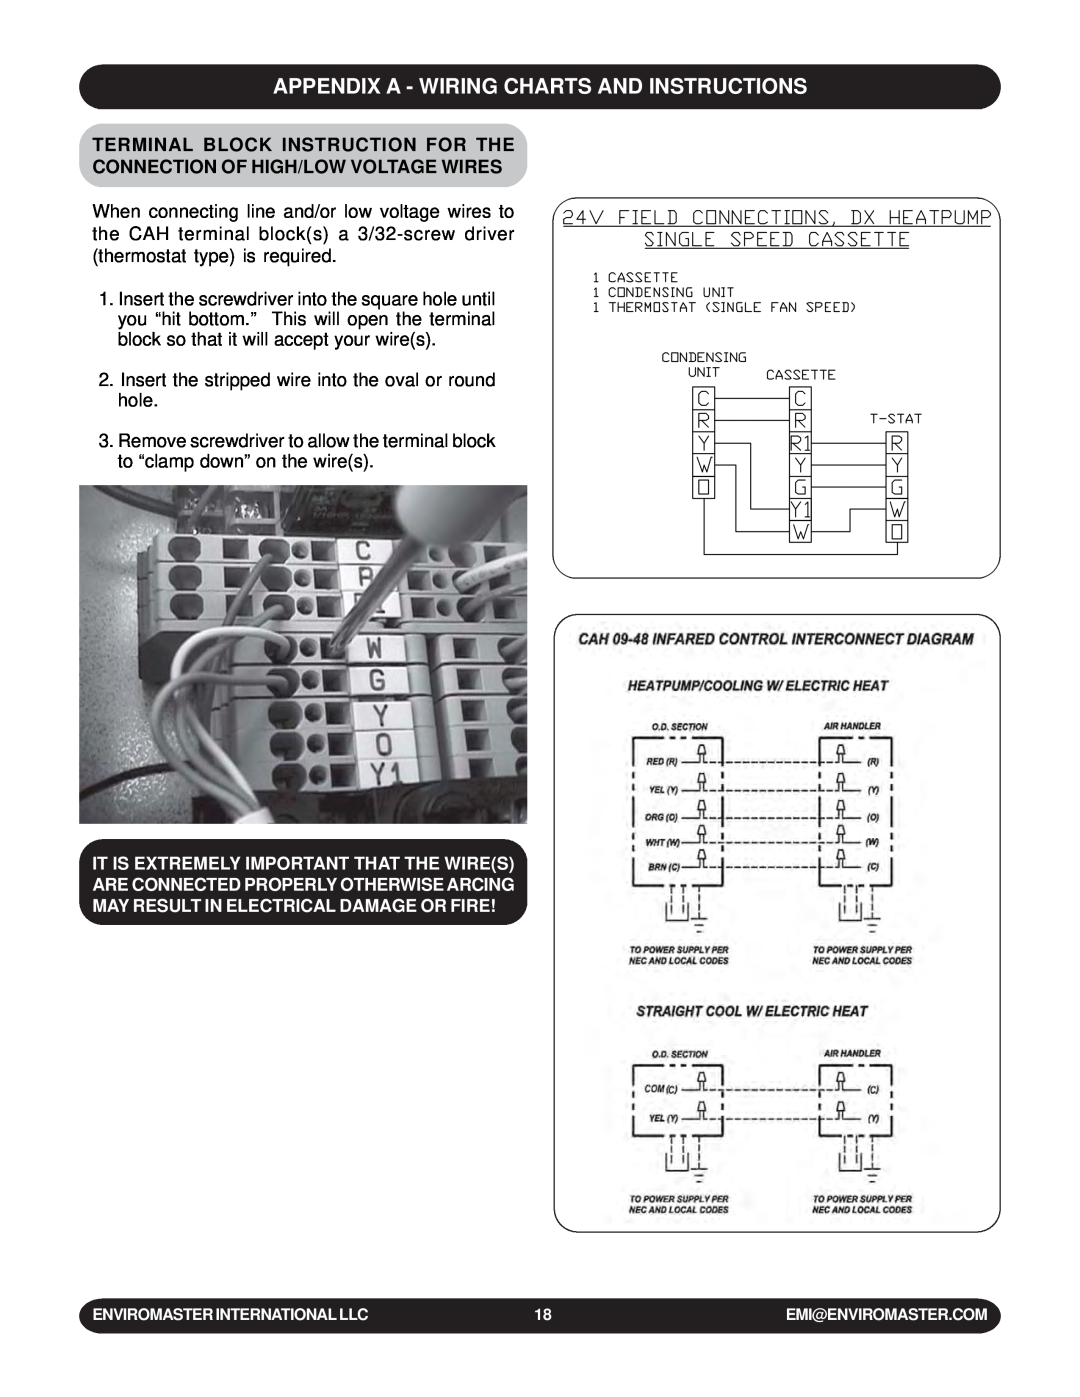 EMI WLCA installation manual Appendix A - Wiring Charts And Instructions, Terminal Block Instruction For The 